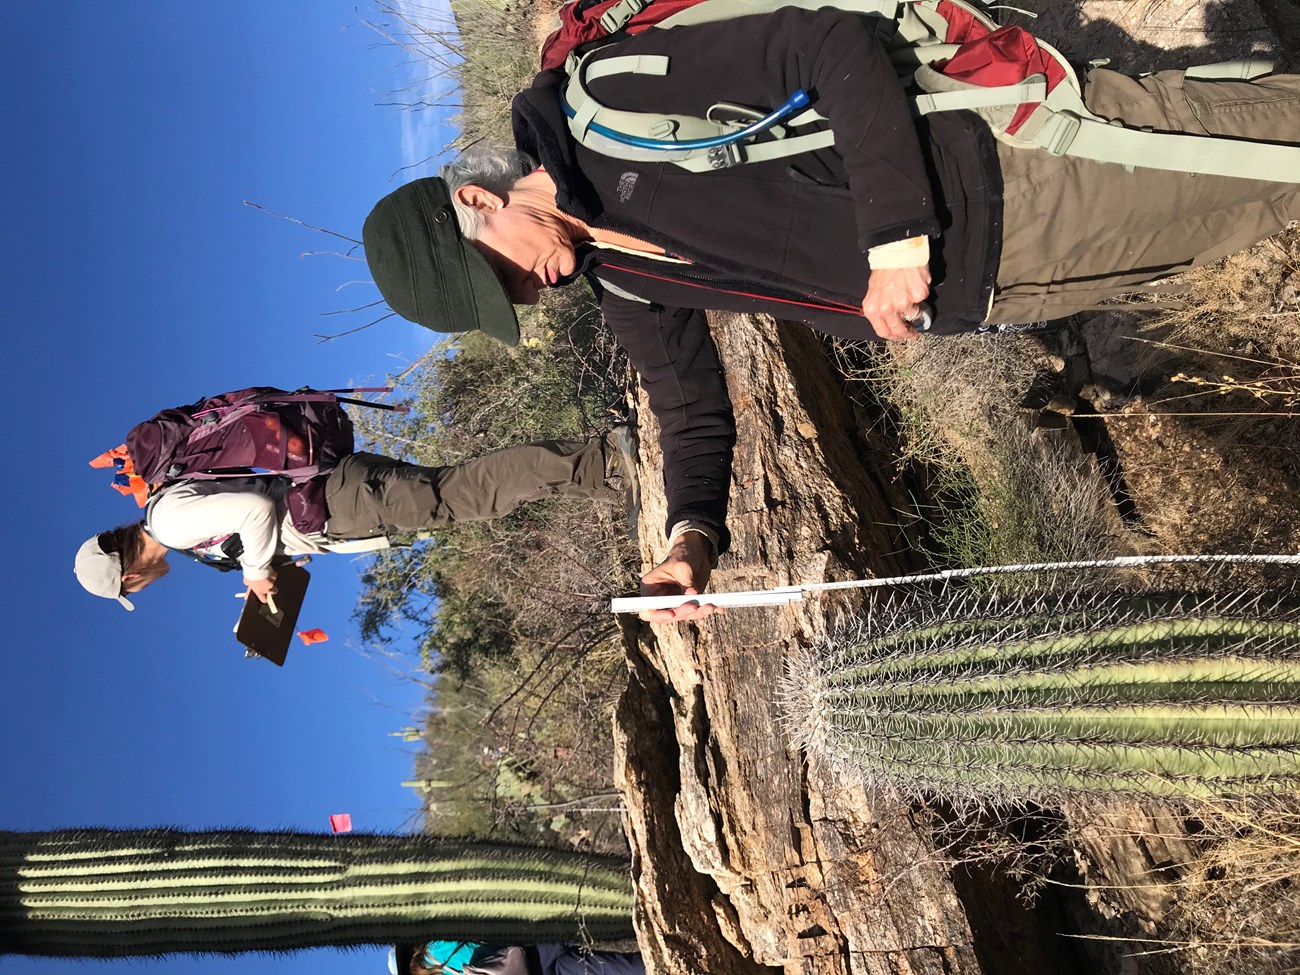 A volunteer measuring the height of a short saguaro using a meter stick. Behind them is another person looking at a saguaro growing on a boulder with an orange flag.